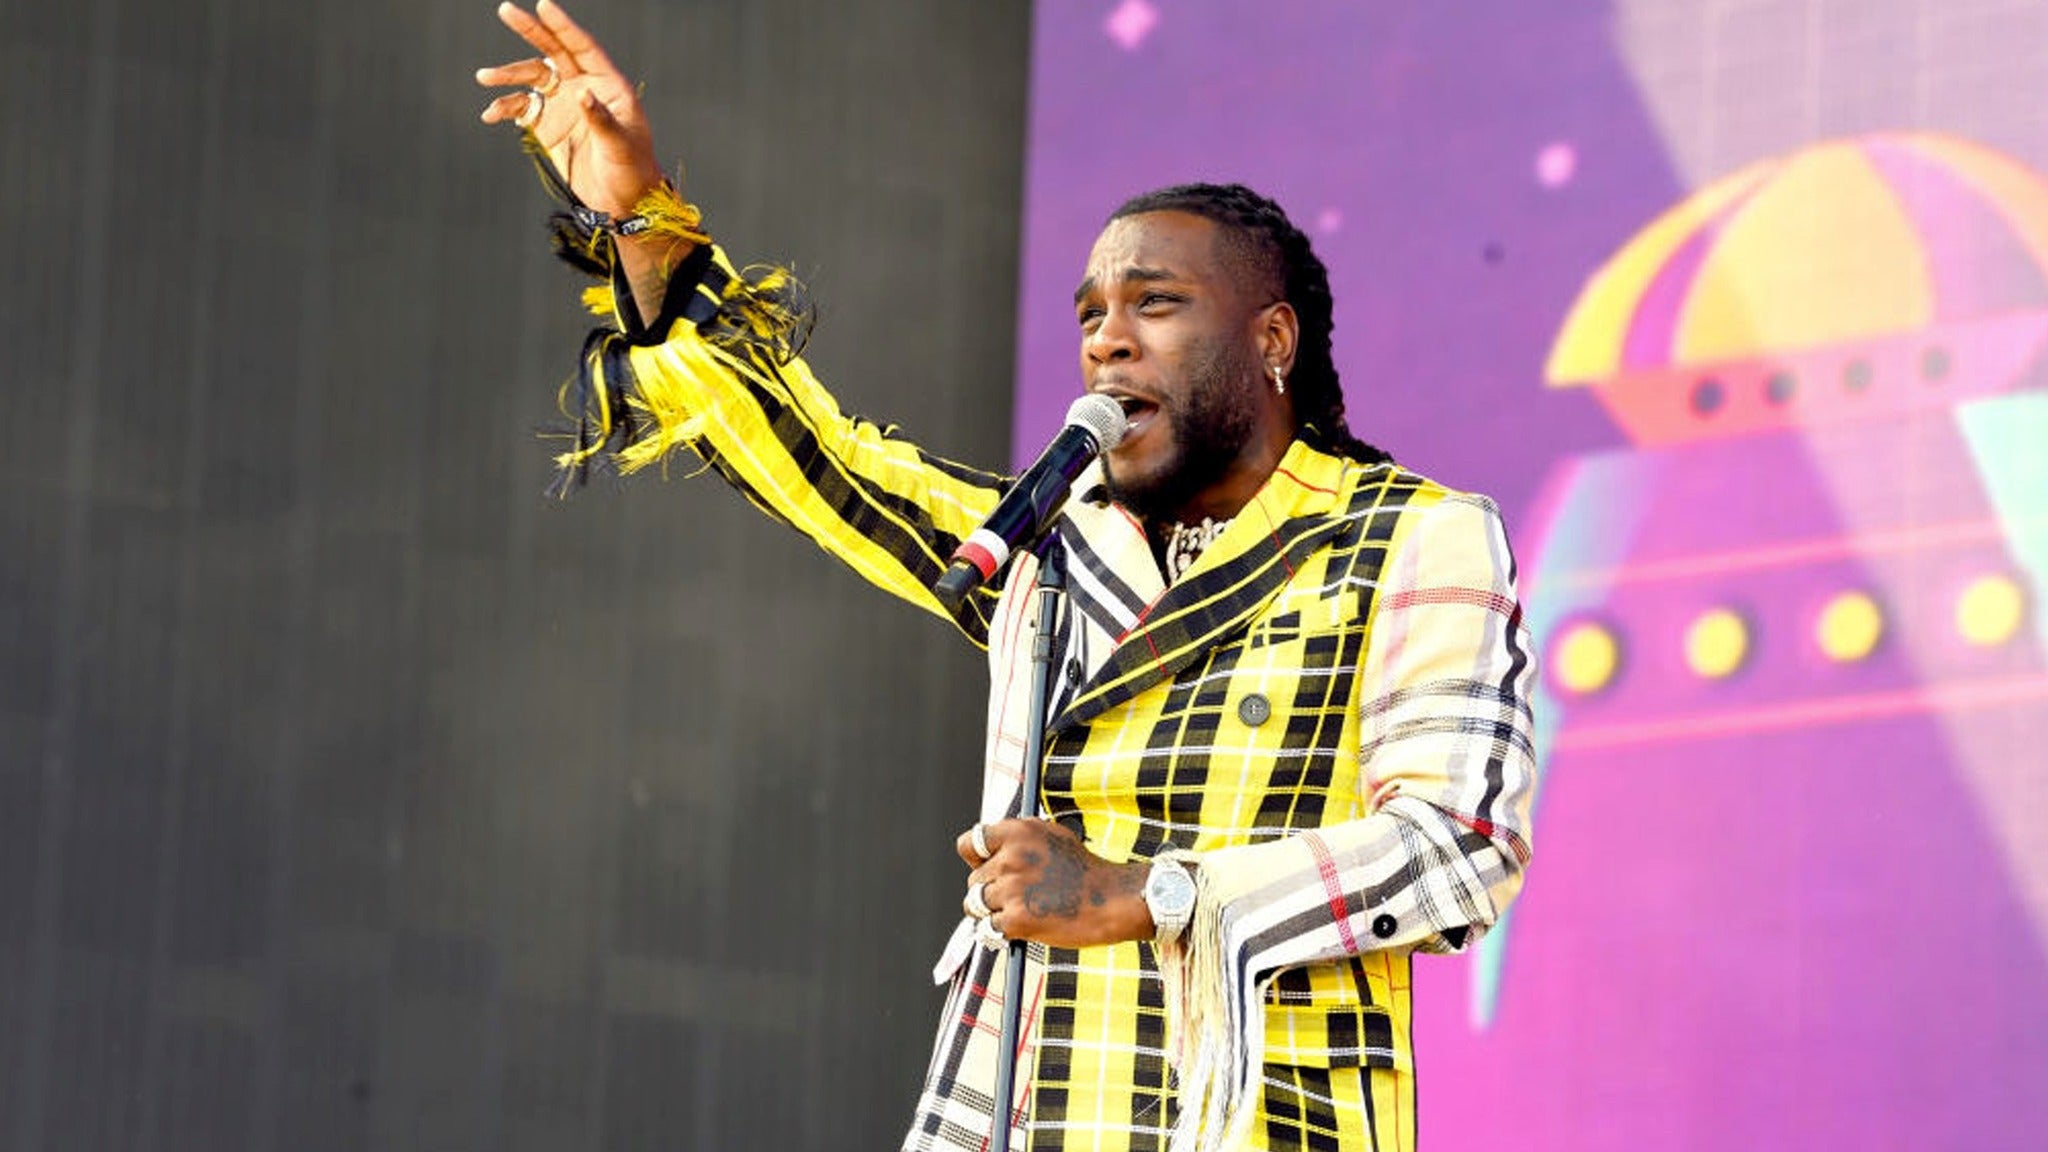 Burna Boy - Twice As Tall Tour in Miami Beach event information